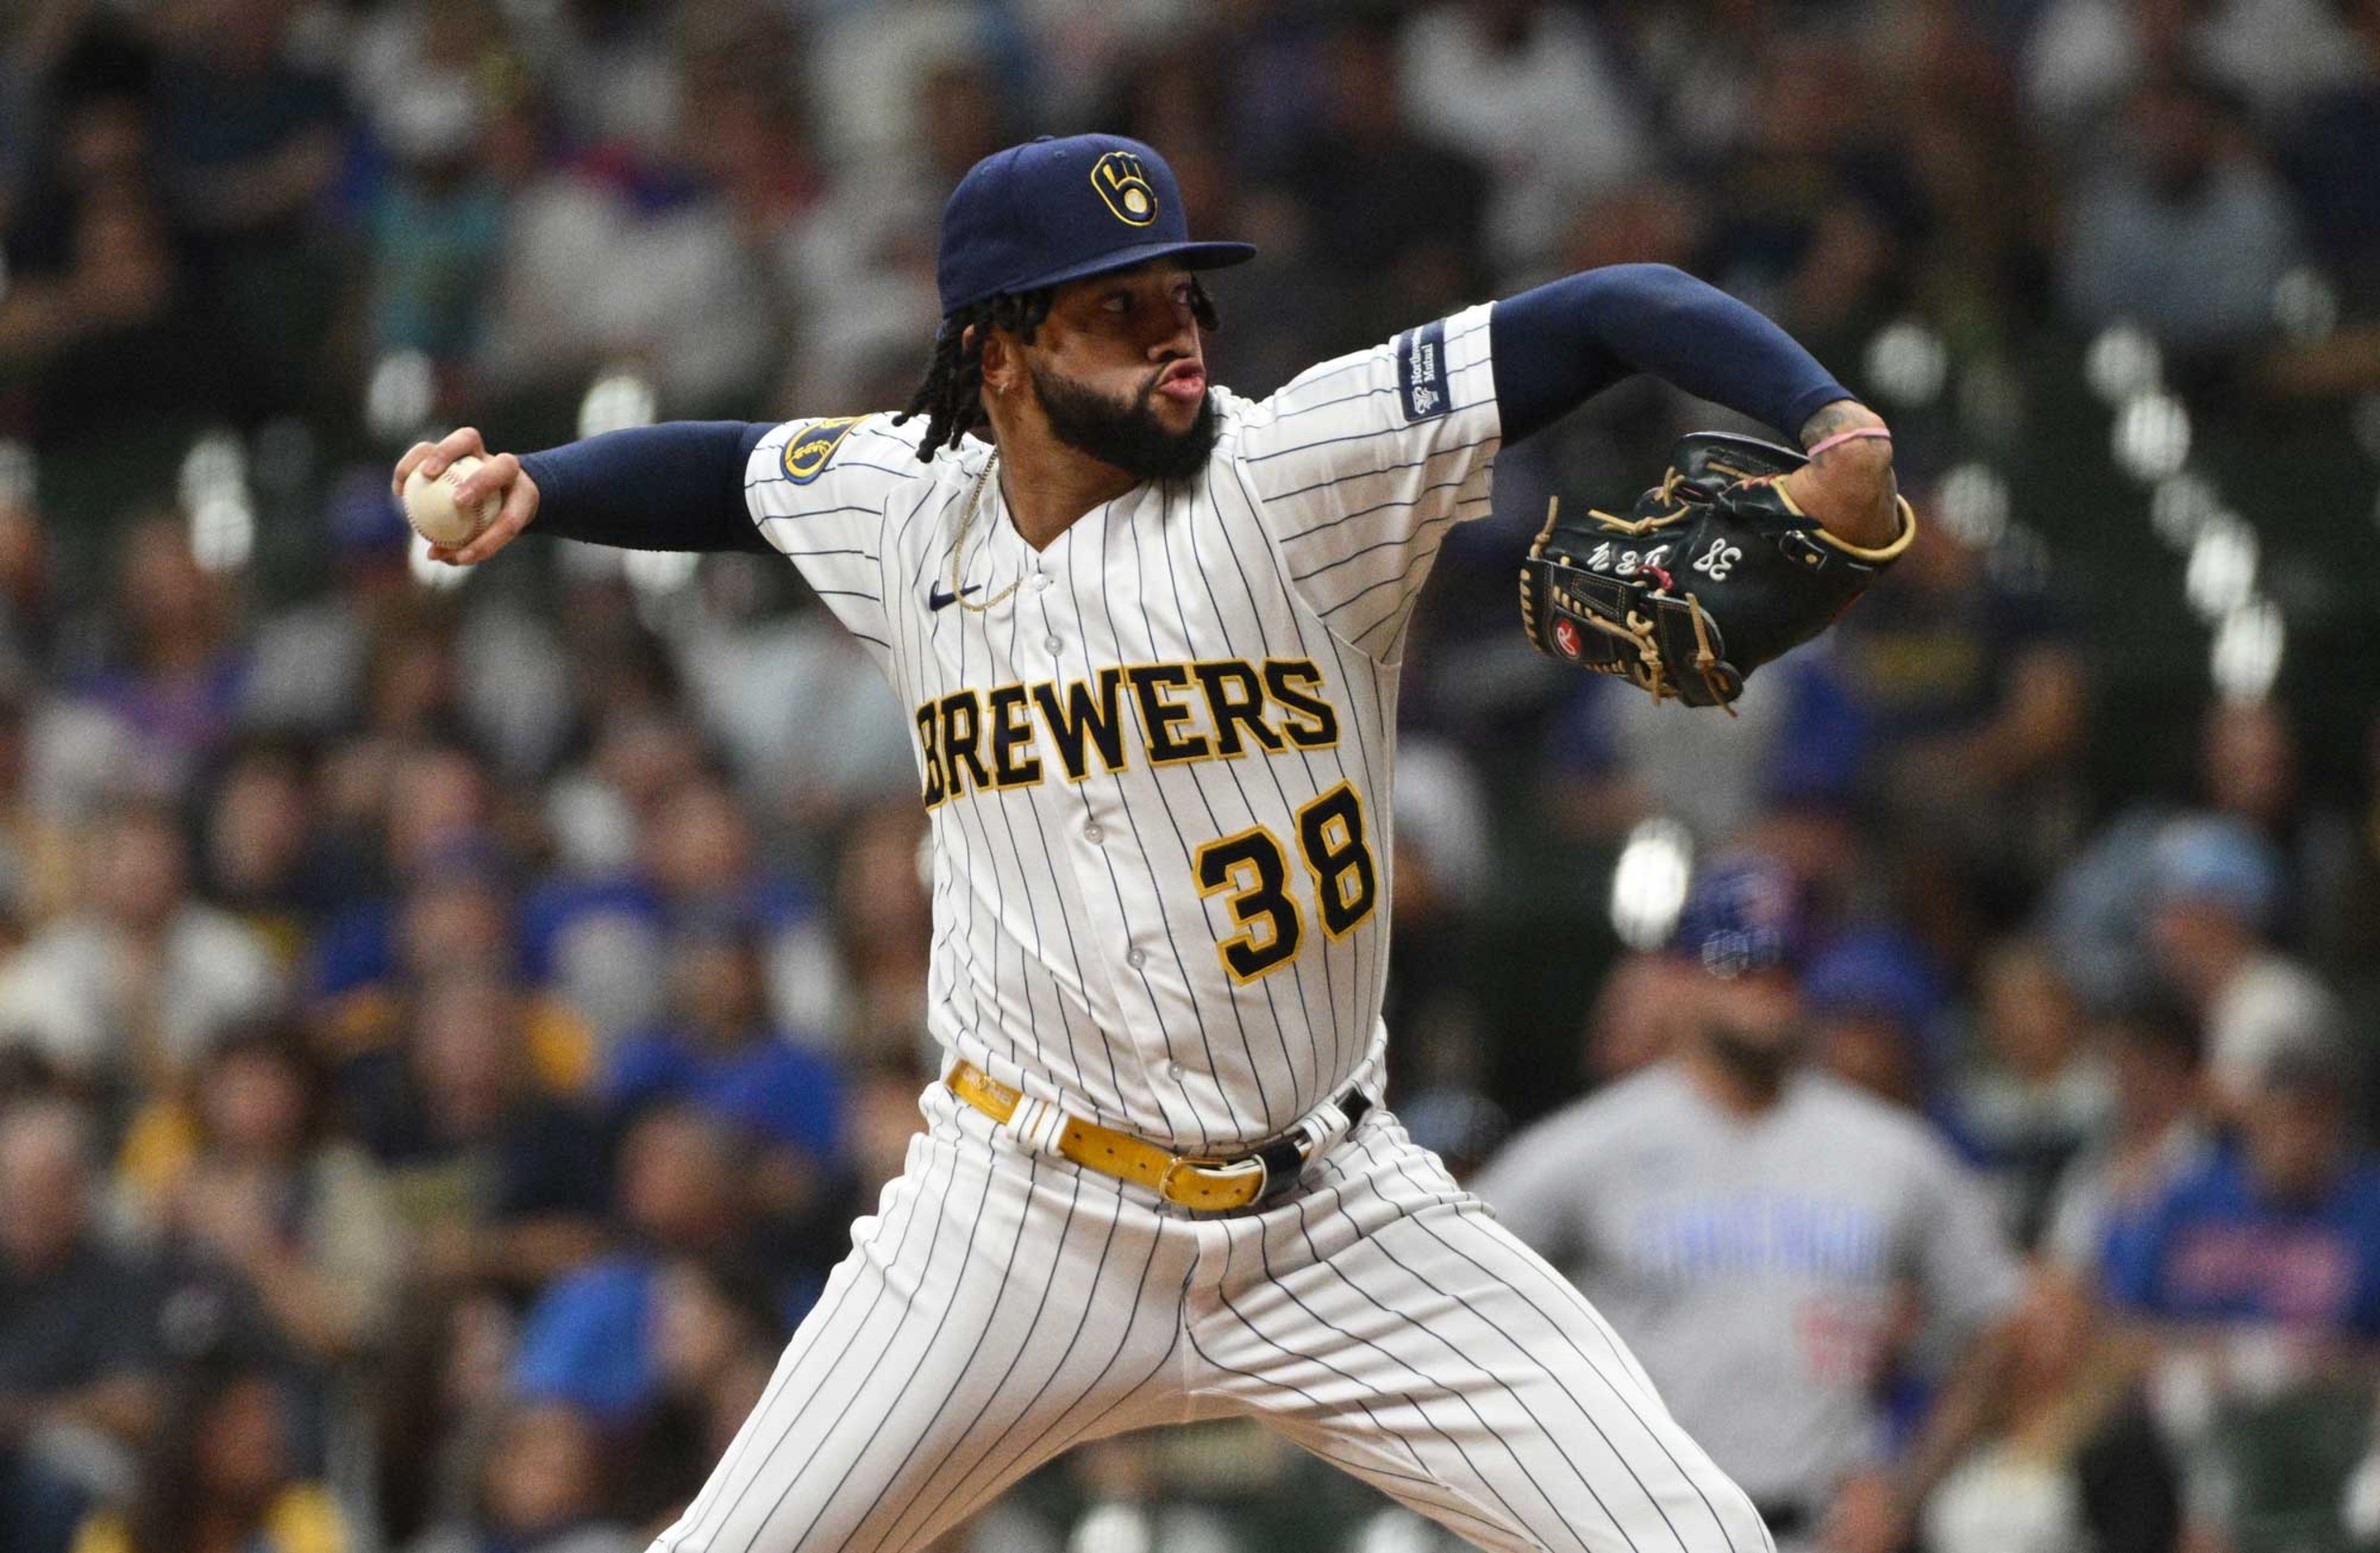 <p>Despite the trade of Corbin Burnes and injury to Brandon Woodruff, pitching could still be a strength of the Brewers roster. The team still has a capable ace in Freddy Peralta, a former top prospect returning from injury in Aaron Ashby, and additional intriguing arms like Jakob Junis, DL Hall, and Robert Gasser. The bullpen also remains strong, led by elite closer Devin Williams.</p><p><a href='https://www.msn.com/en-us/community/channel/vid-cj9pqbr0vn9in2b6ddcd8sfgpfq6x6utp44fssrv6mc2gtybw0us'>Follow us on MSN to see more of our exclusive MLB content.</a></p>